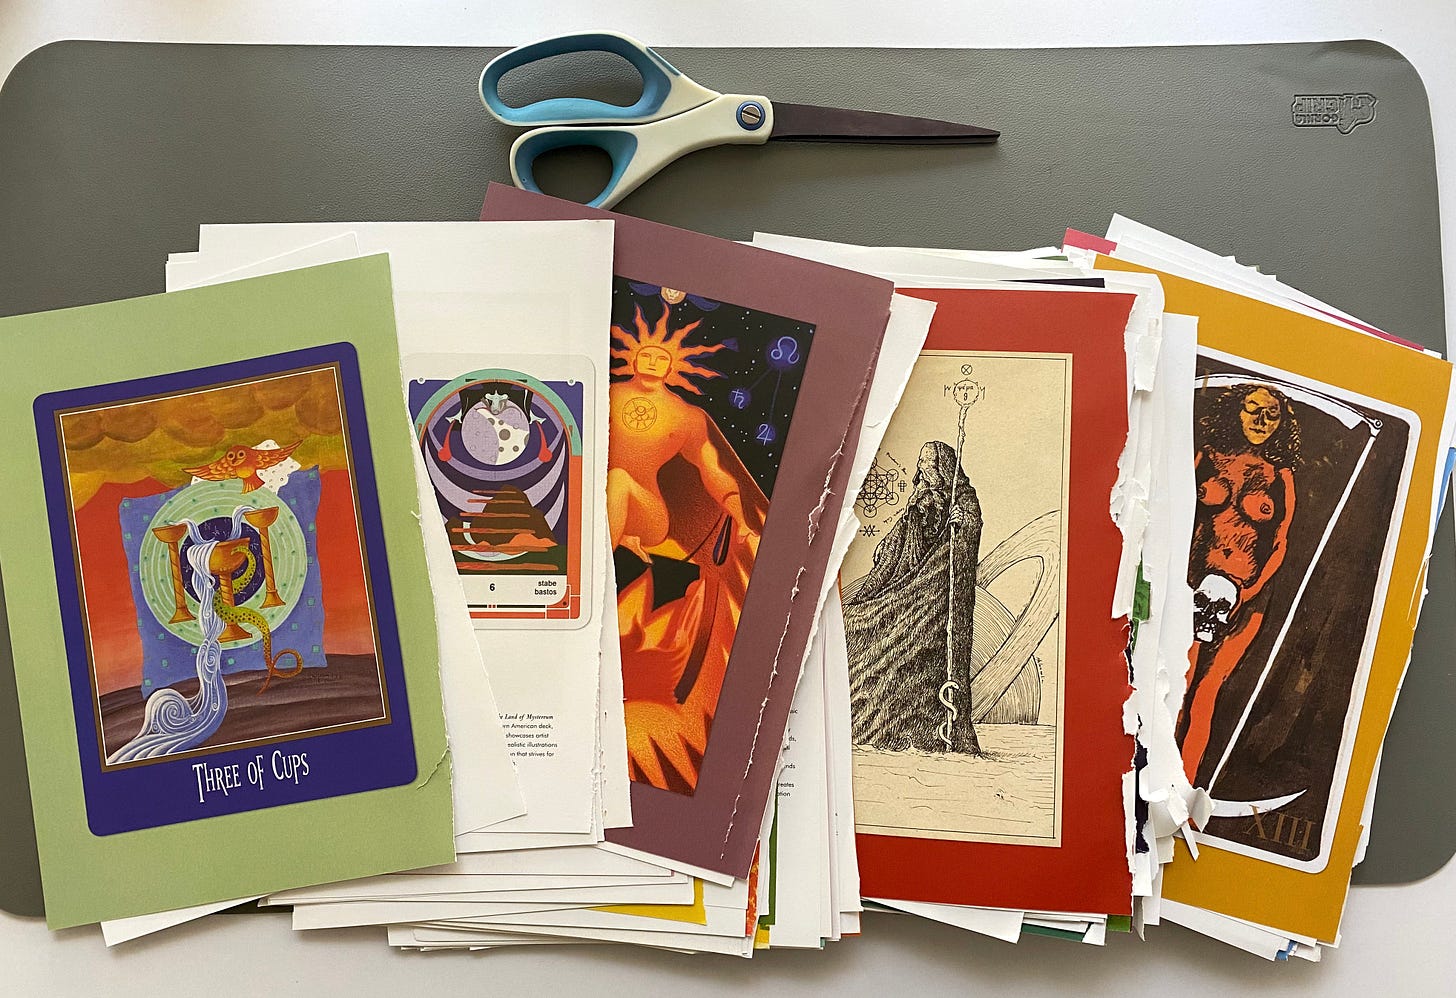 Pages from the Library of Esoterica: Tarot book that are cut out and laid on a desk under a pair of white and blue scissors. 